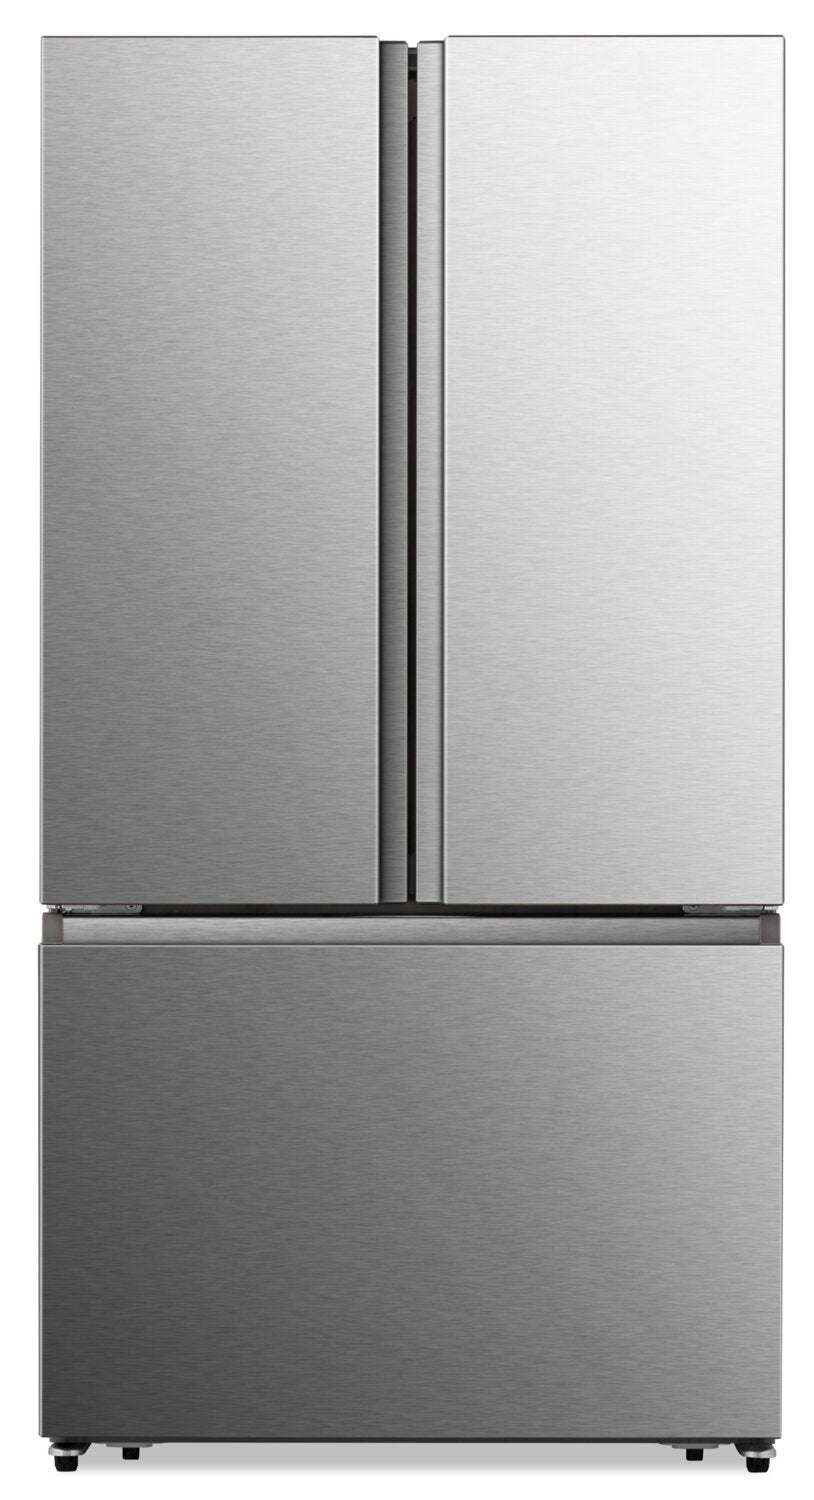 34+ Hisense french door refrigerator ice maker problems ideas in 2021 